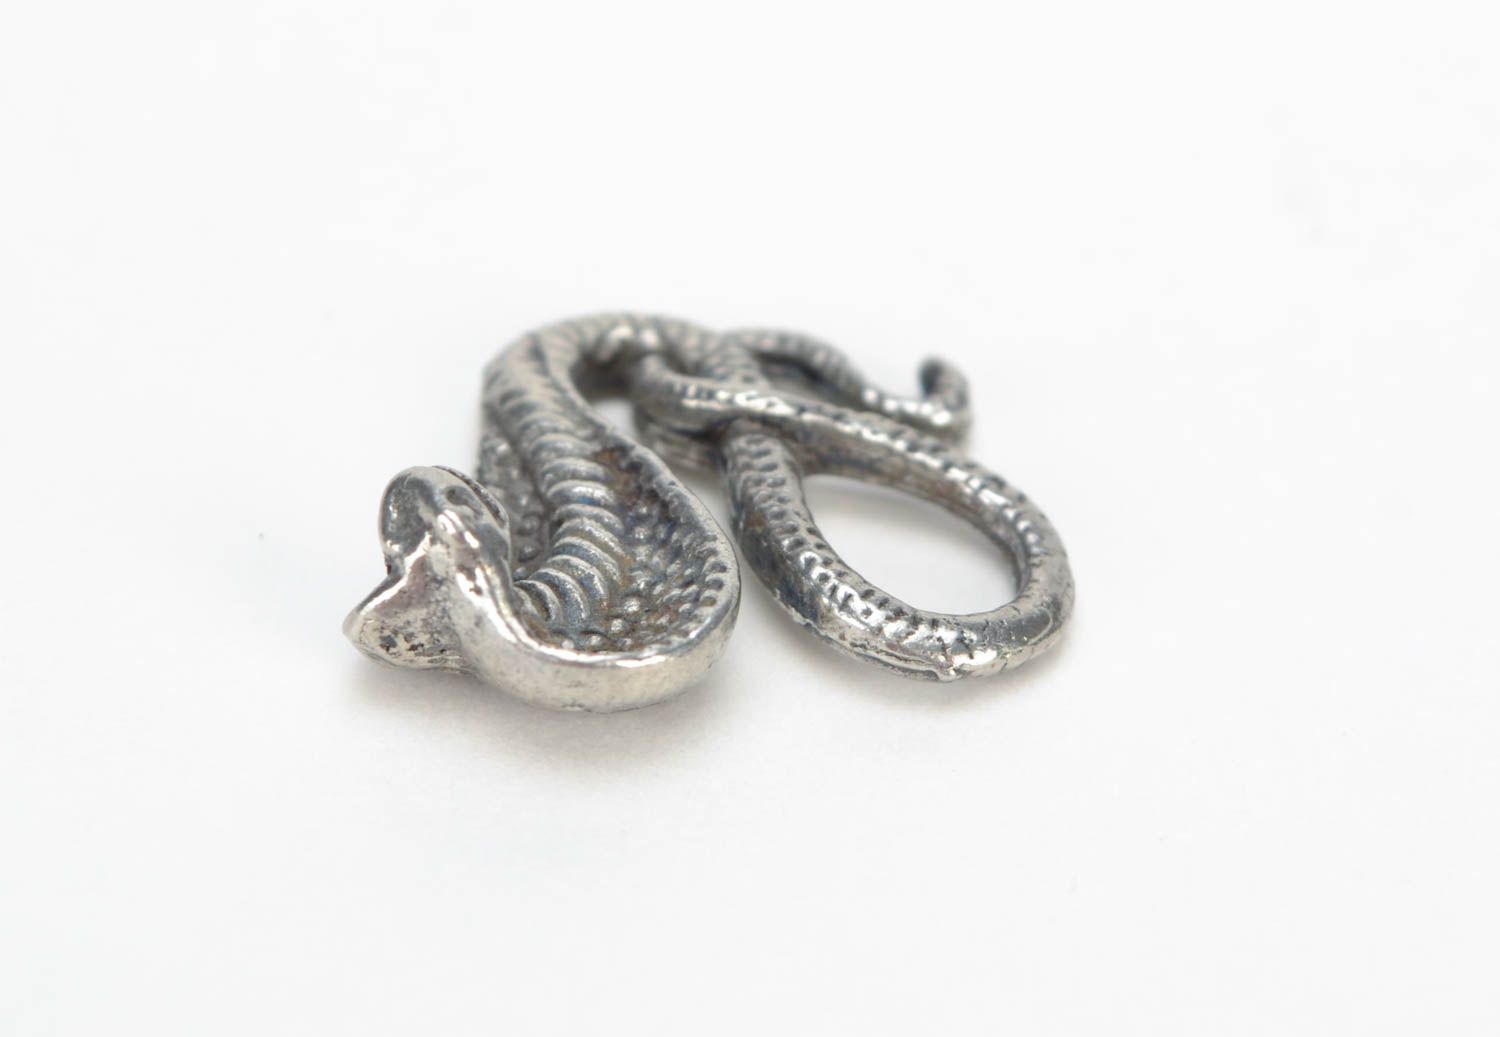 Beautiful metal craft blank pendant in the shape of snake jewelry making ideas photo 3